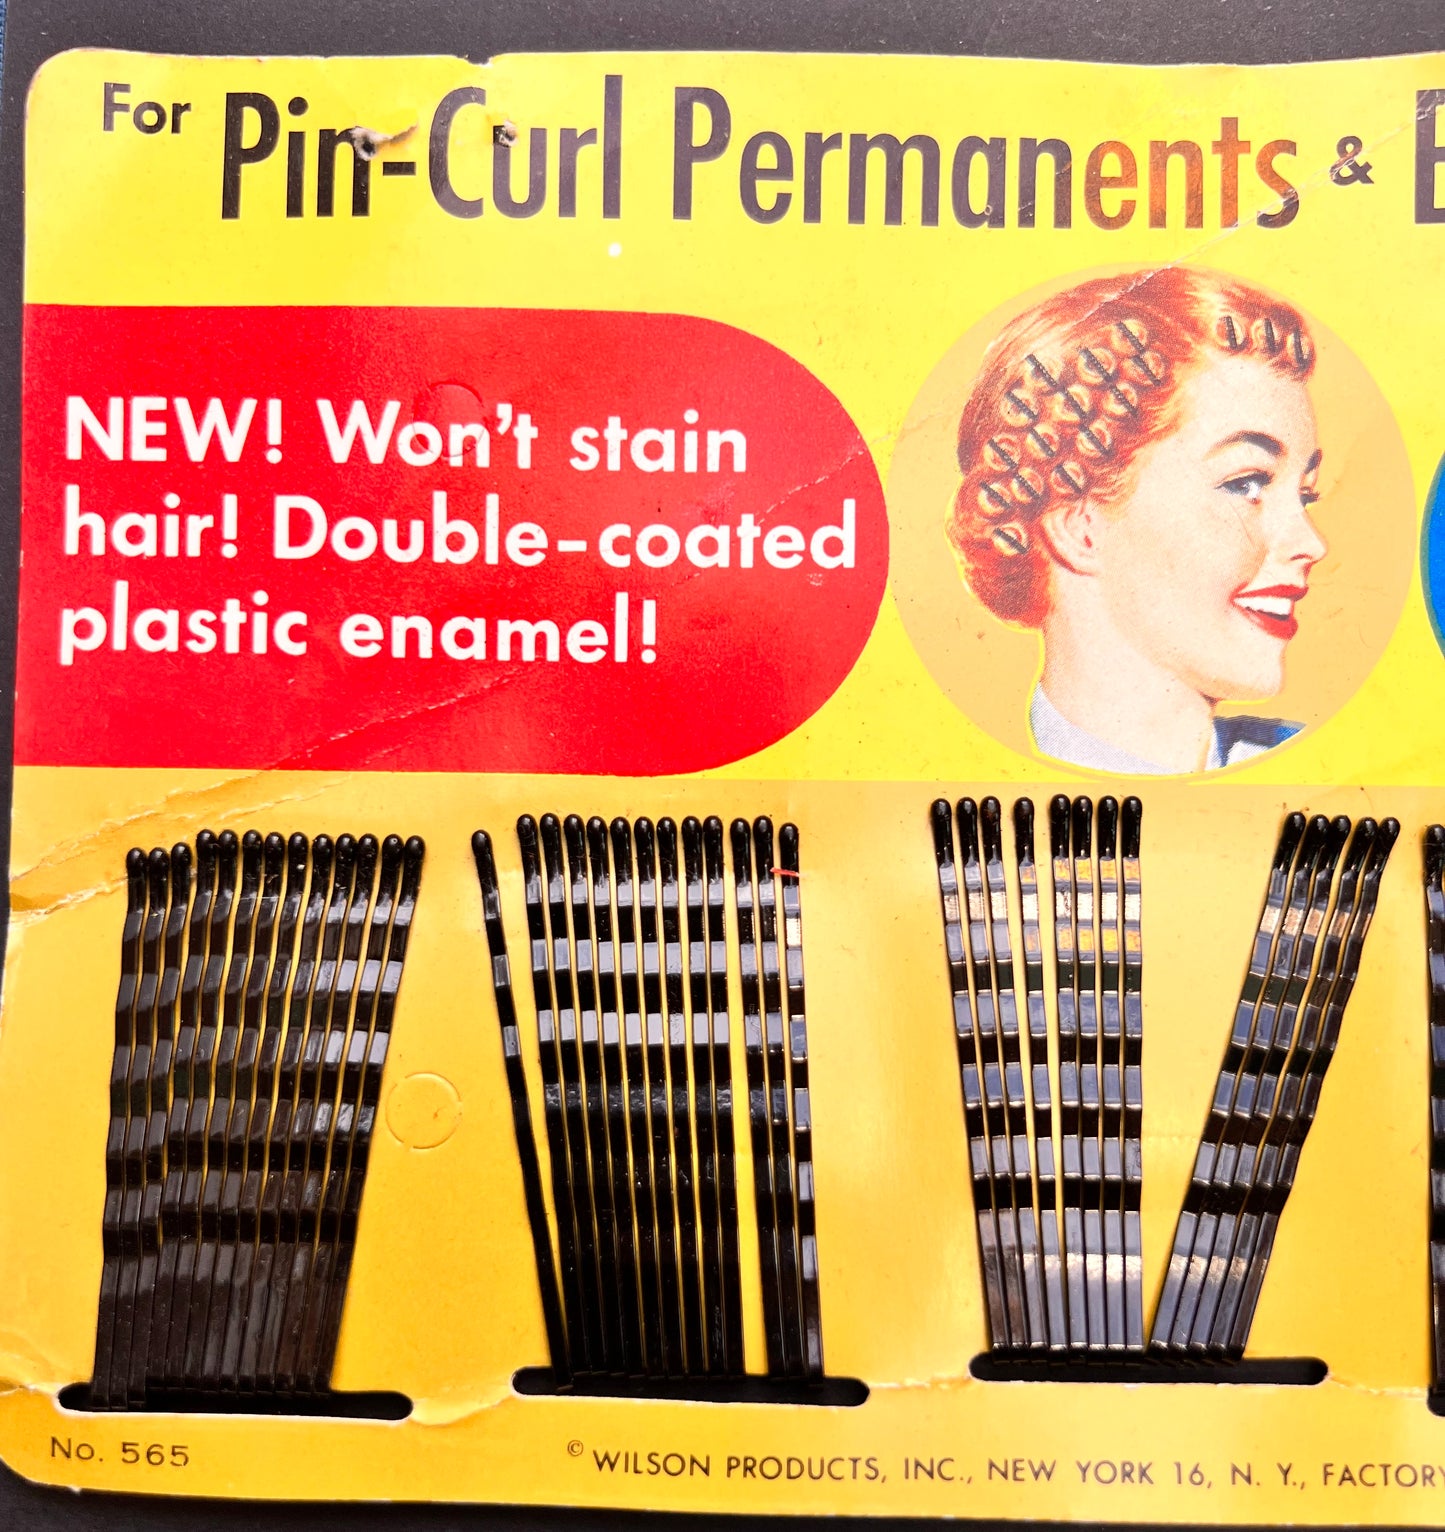 Substantial card of 65 Hair pins for Pin-Curl Permanents & Everyday Use